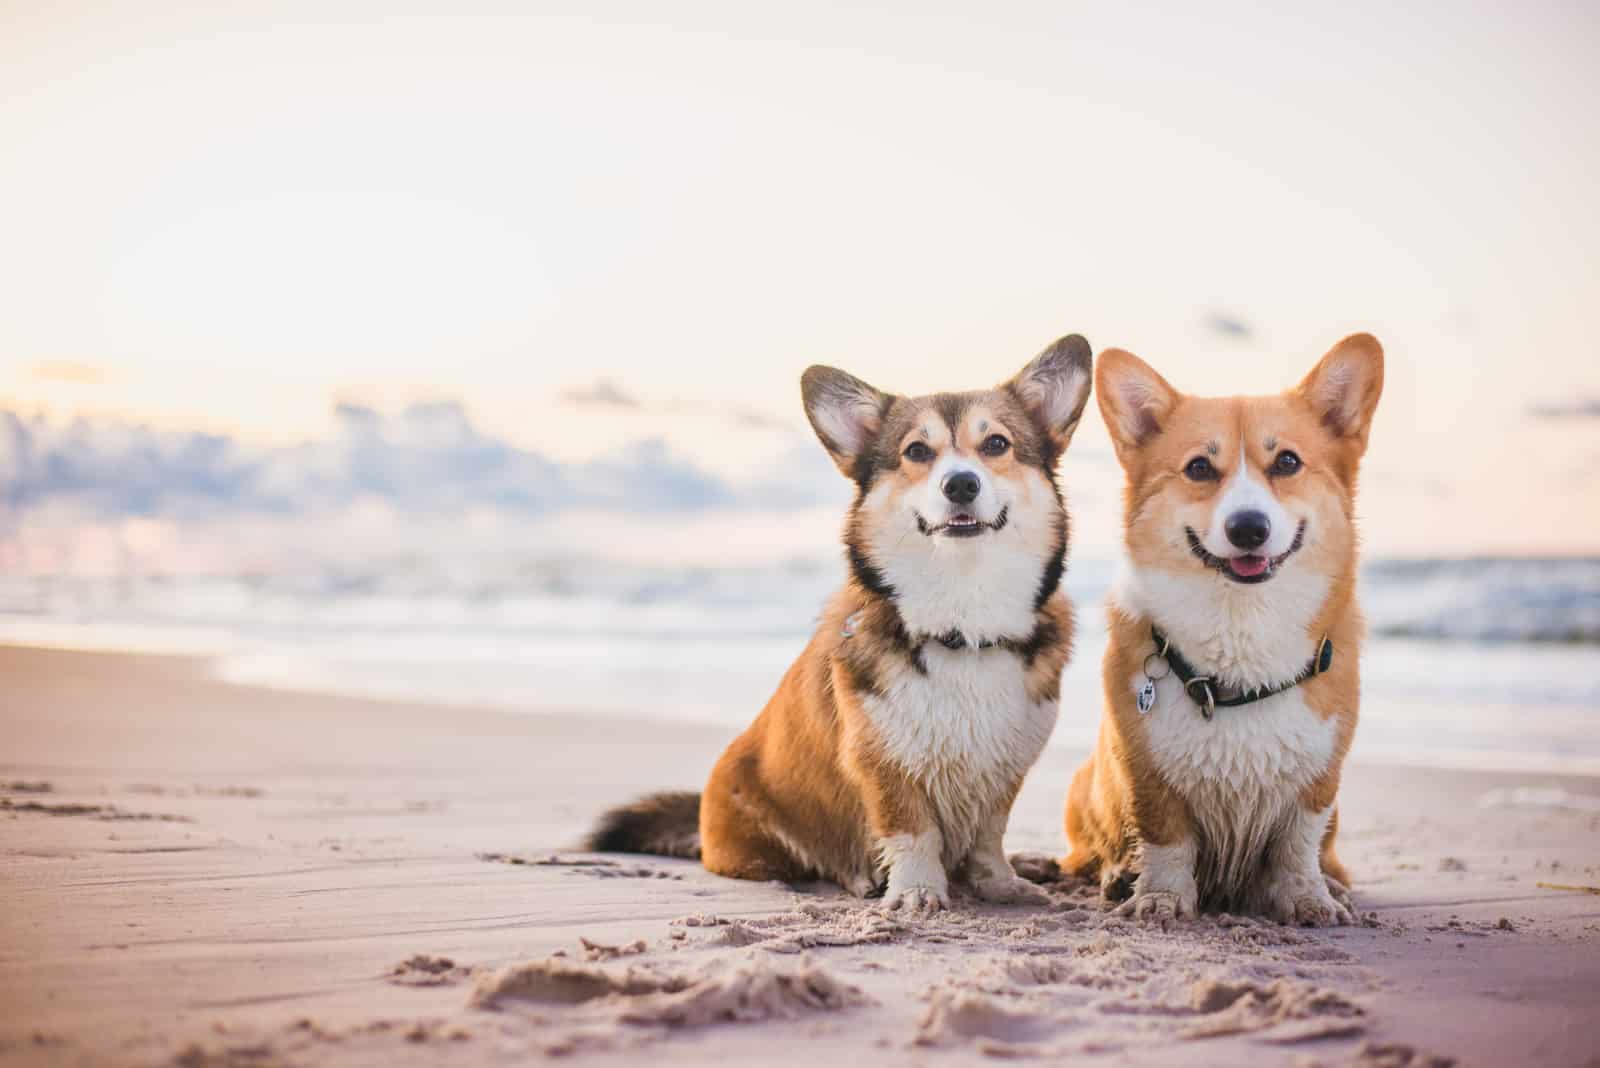 two corgi dogs sitting next to each other on the beach